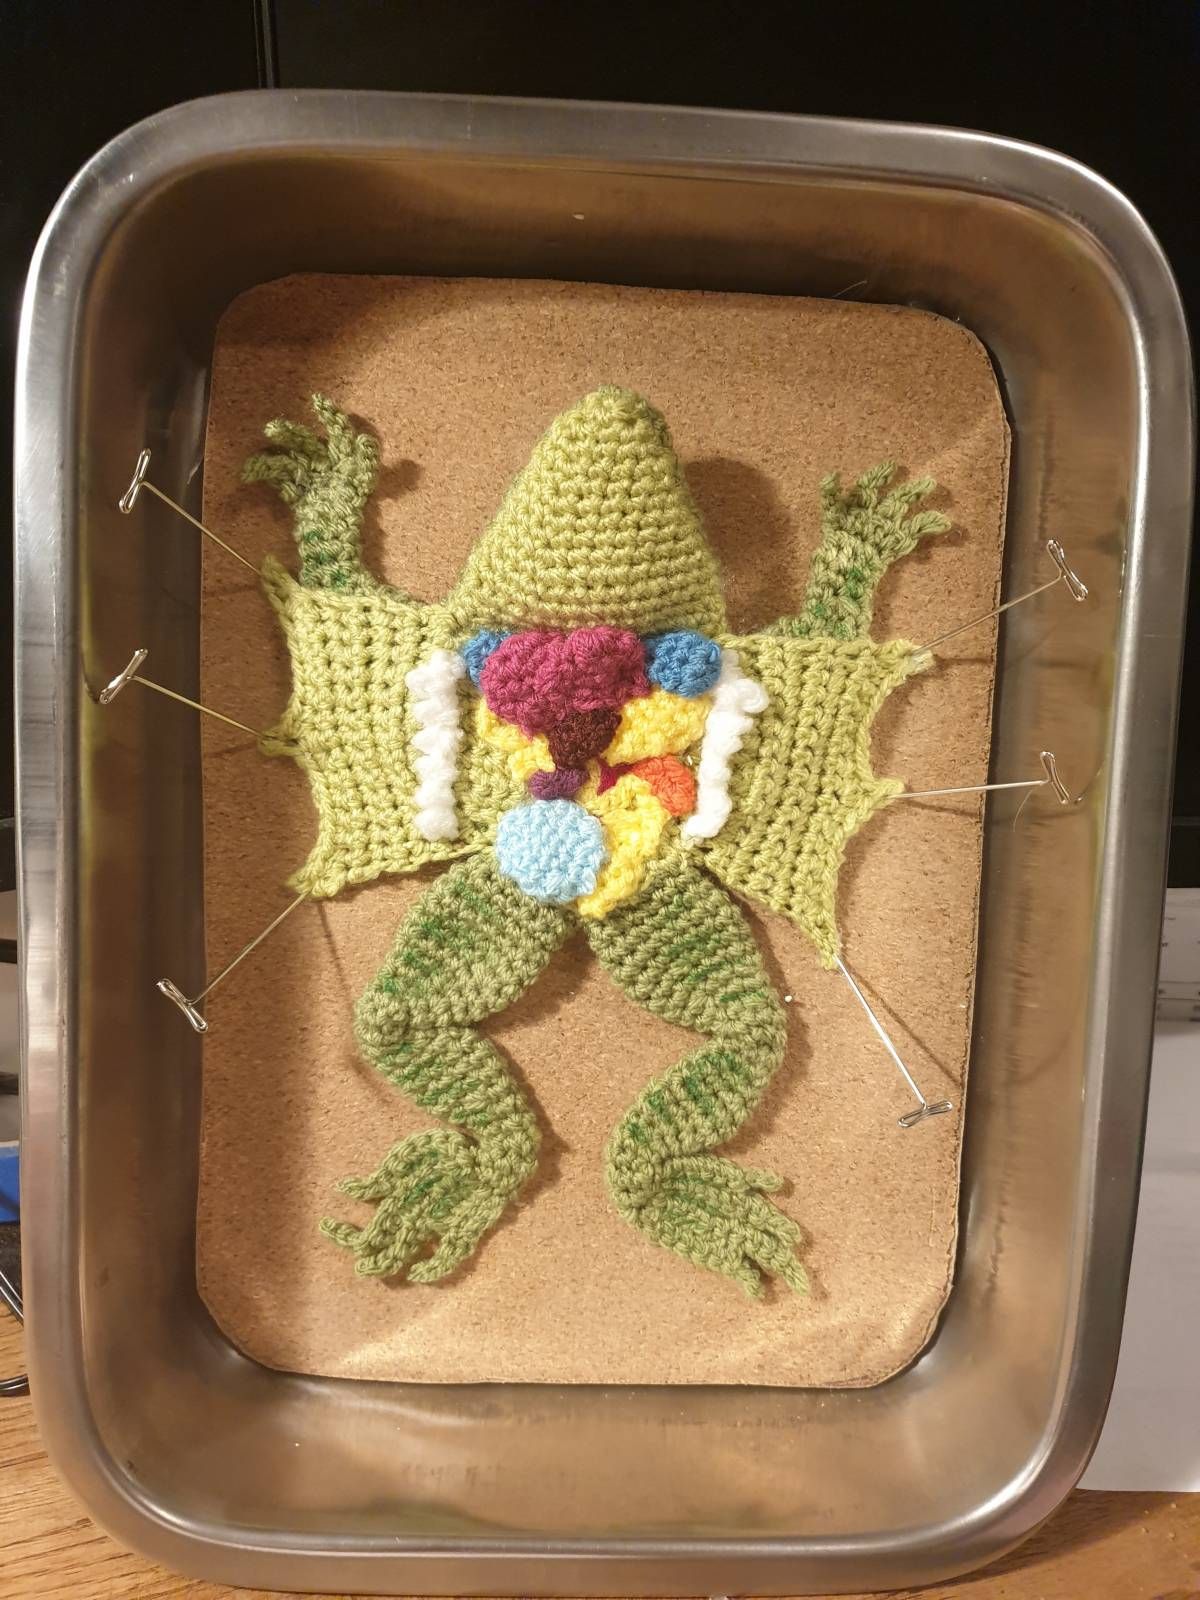 Dissected Crochet Frog Pattern Amigurumi Review by Sara Metcalfe for Cottontail and Whiskers